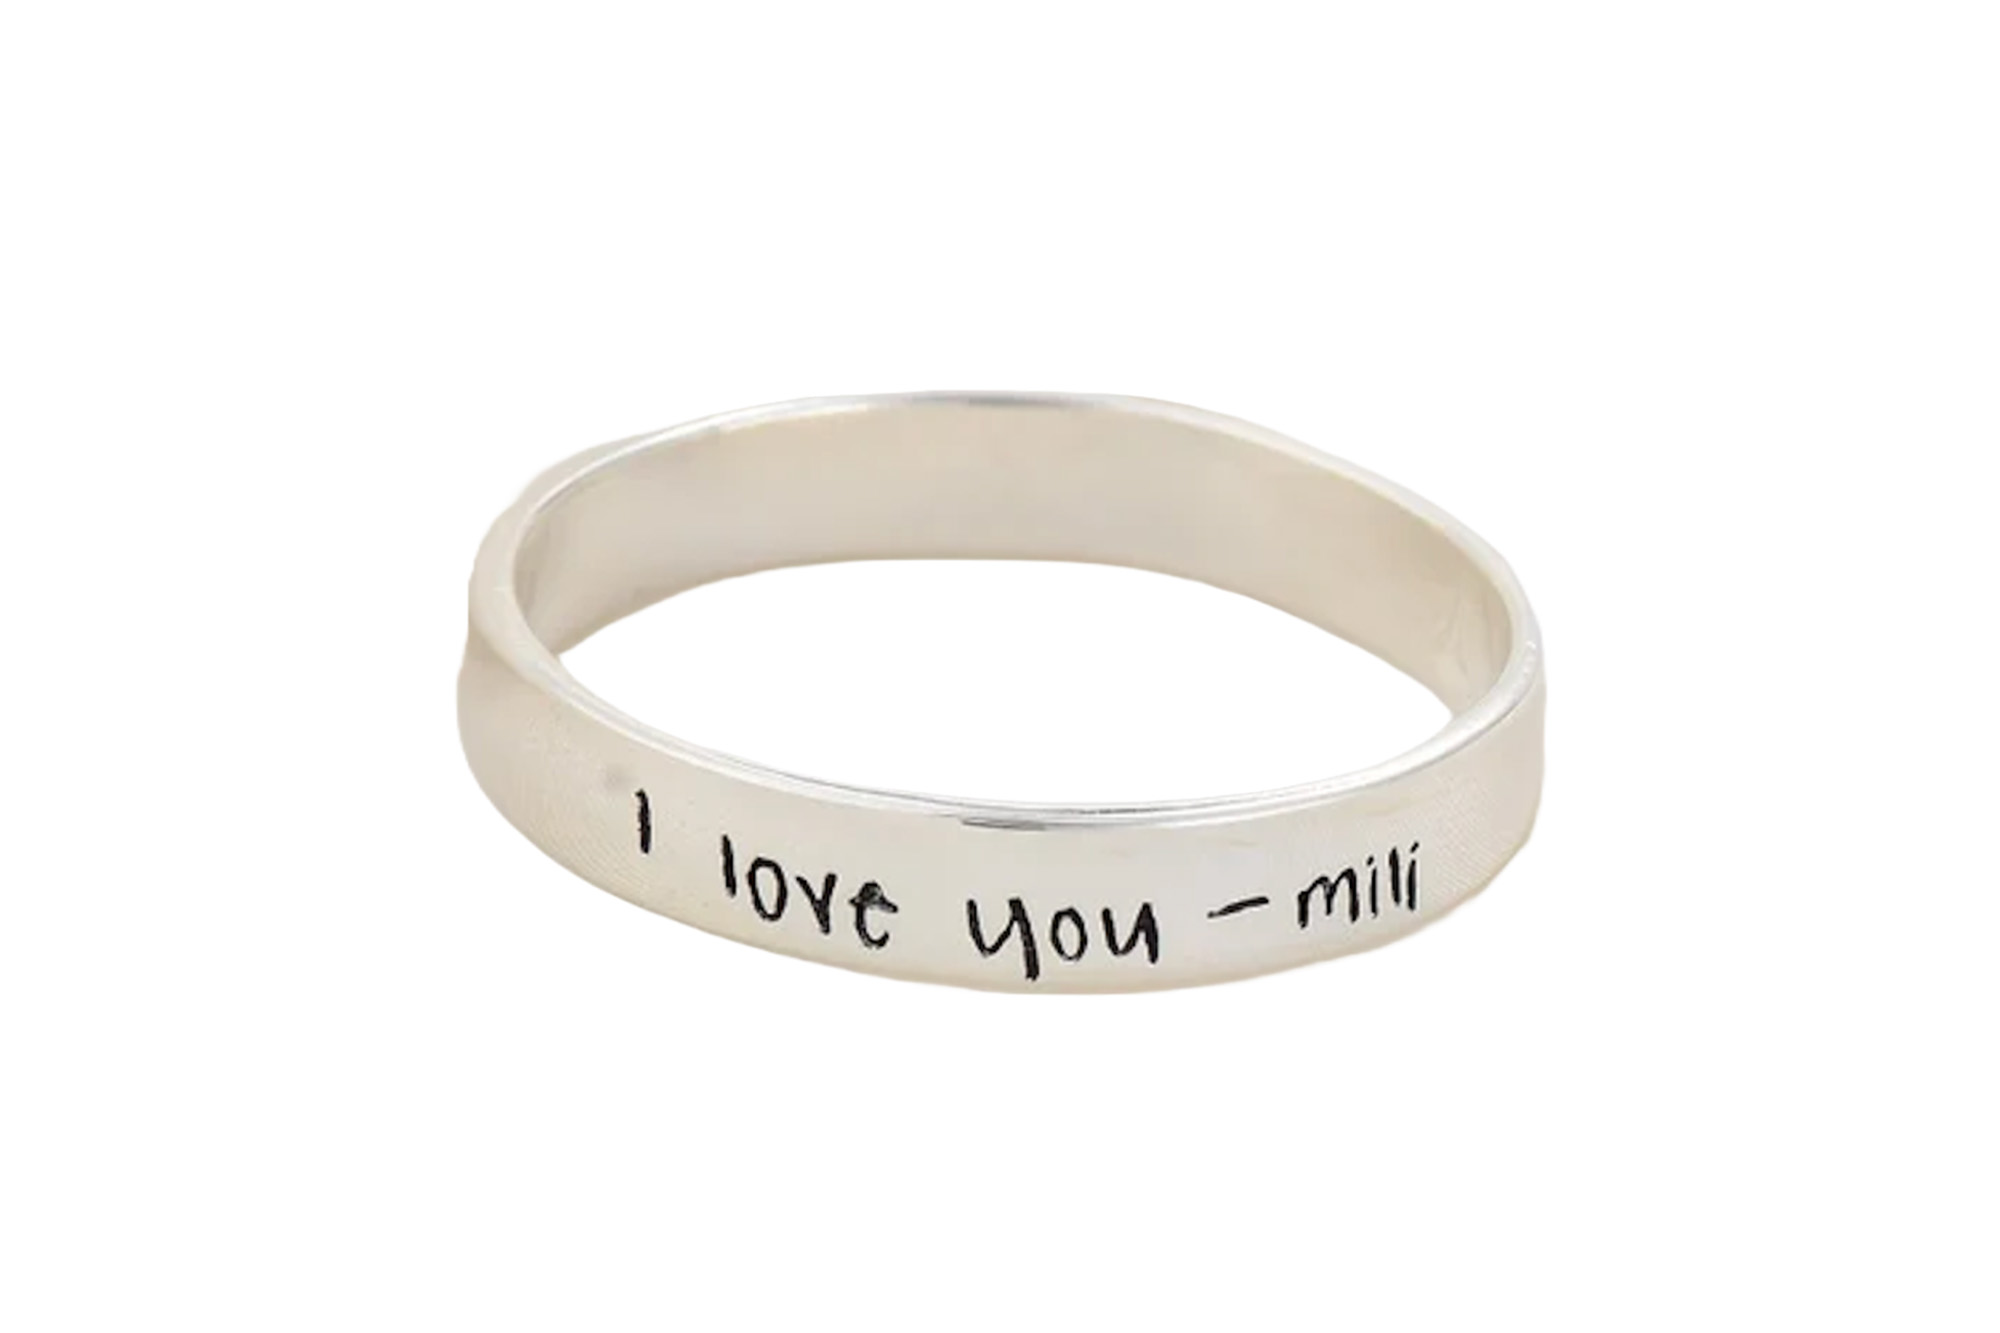 A ring that says "I love you" on it 